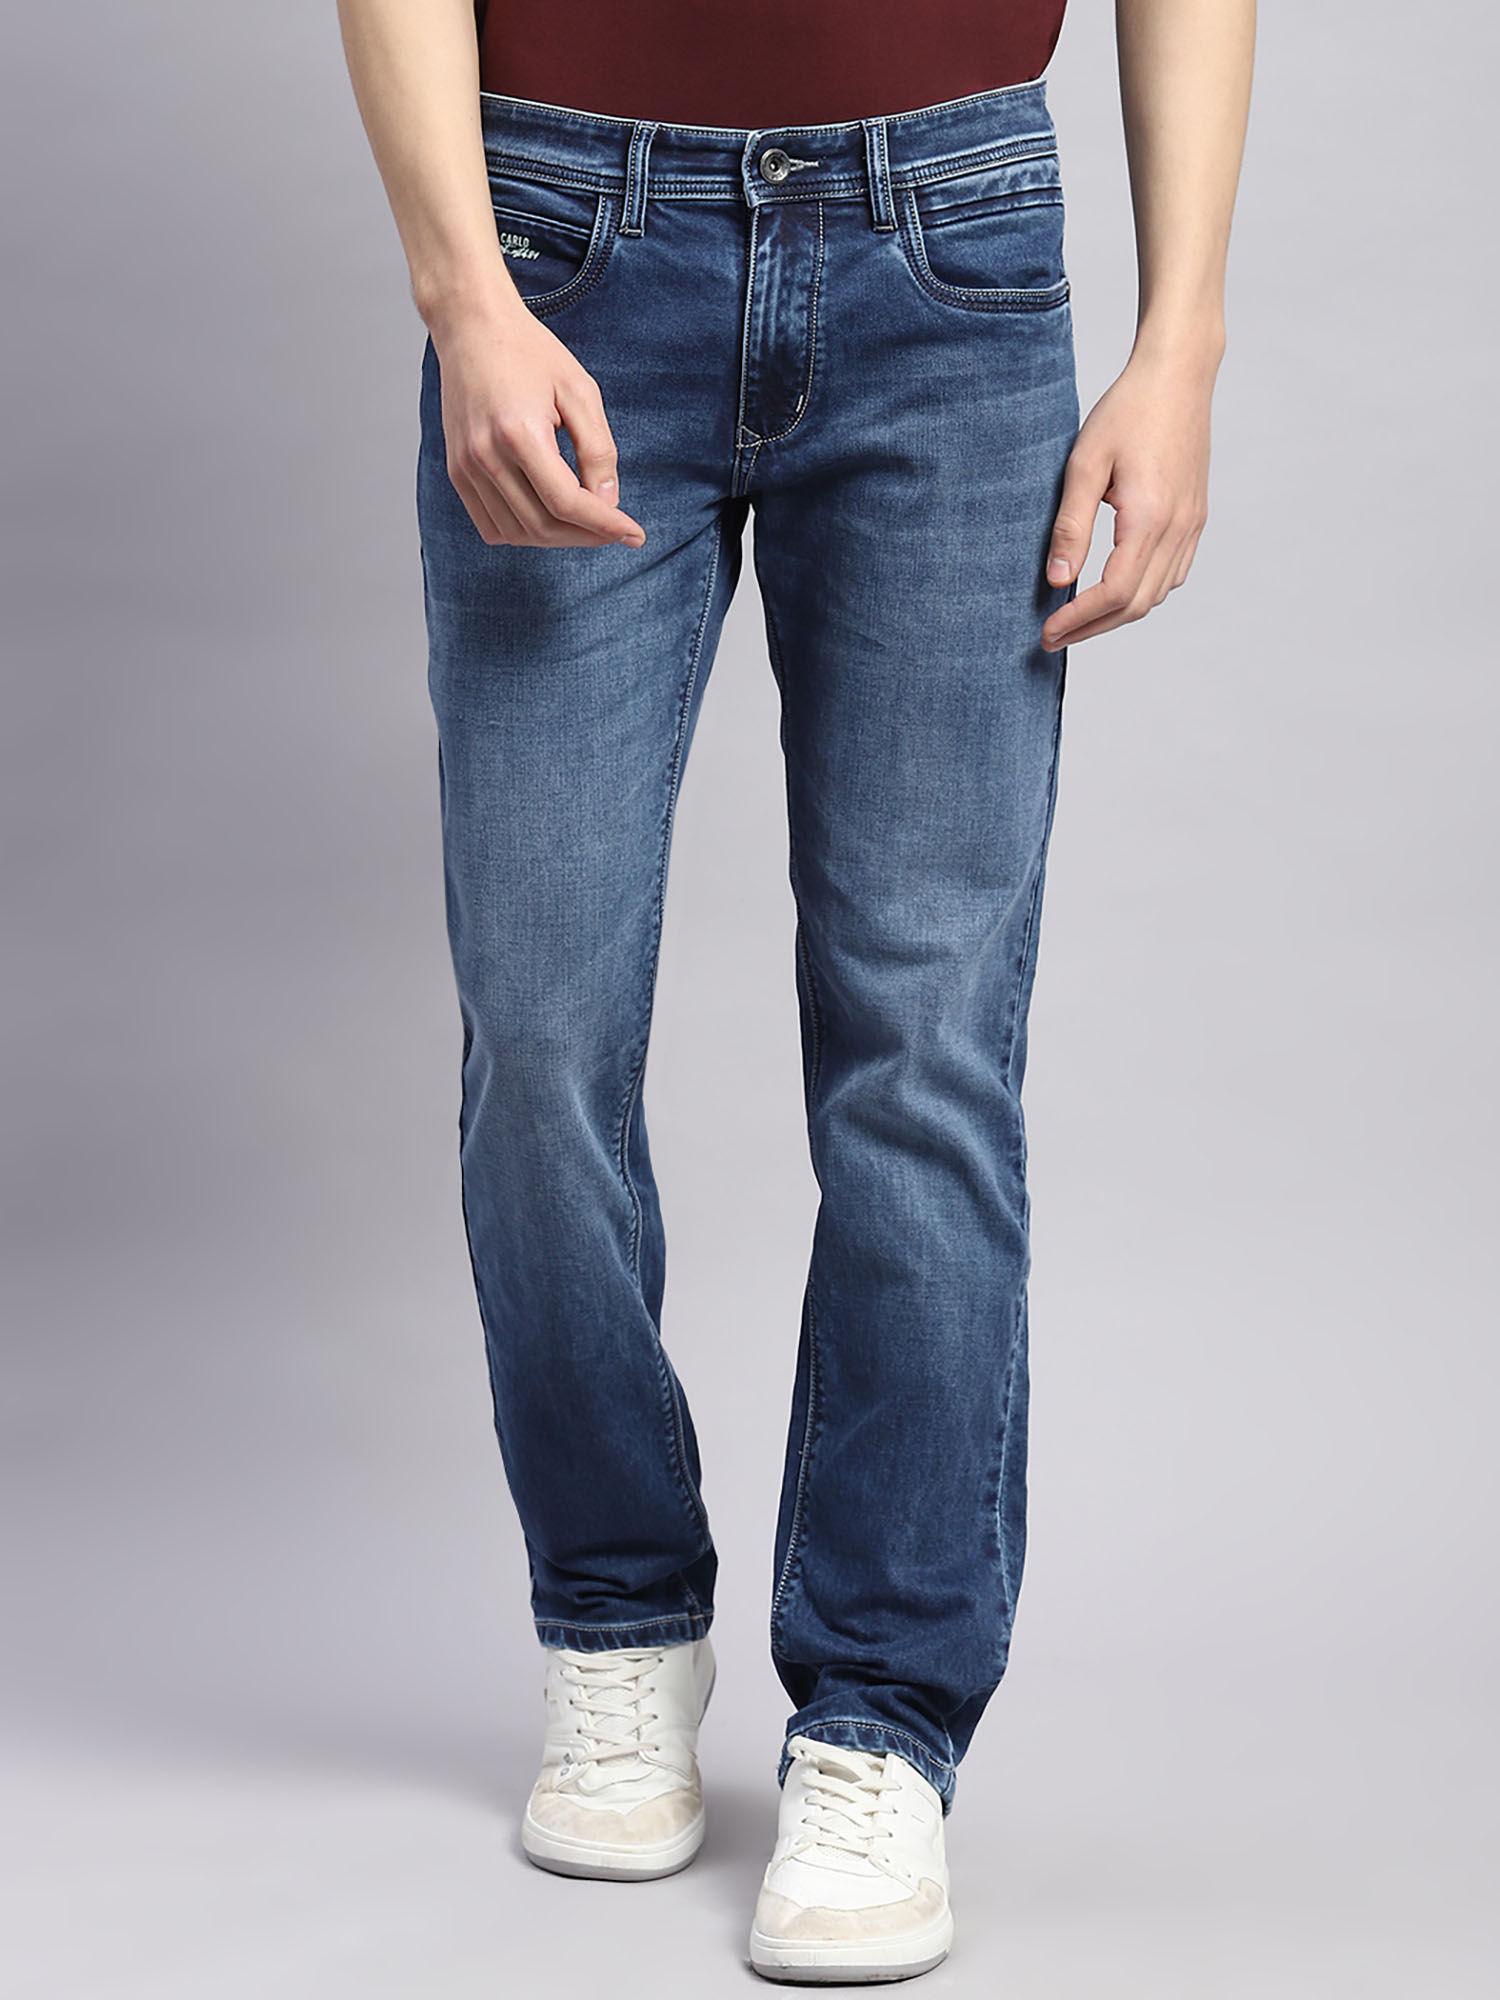 mens-blue-light-wash-cotton-blend-straight-fit-casual-jeans